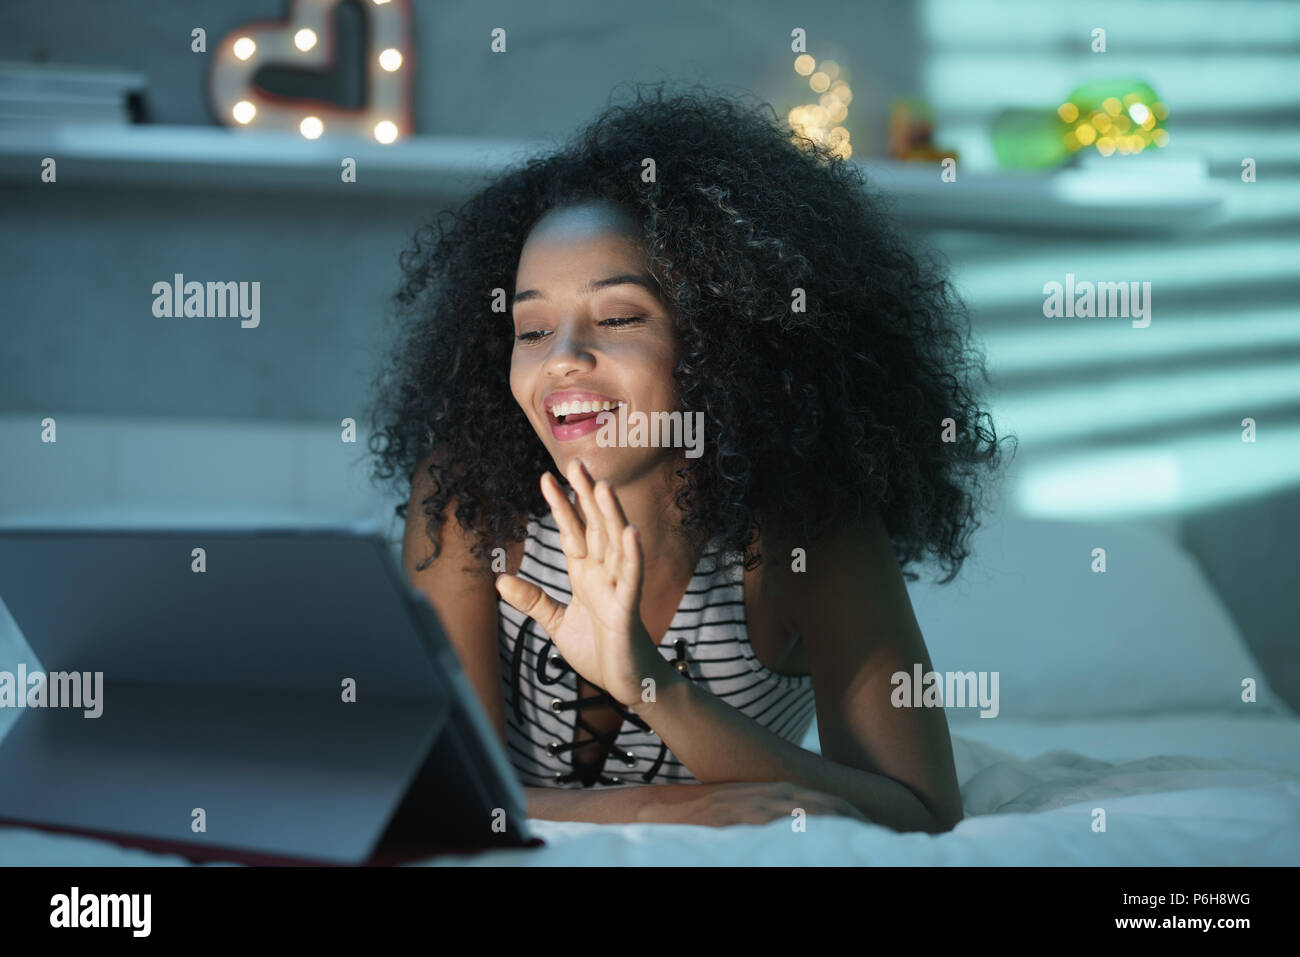 Black Woman Using Webcam And PC For Video Chat Stock Photo